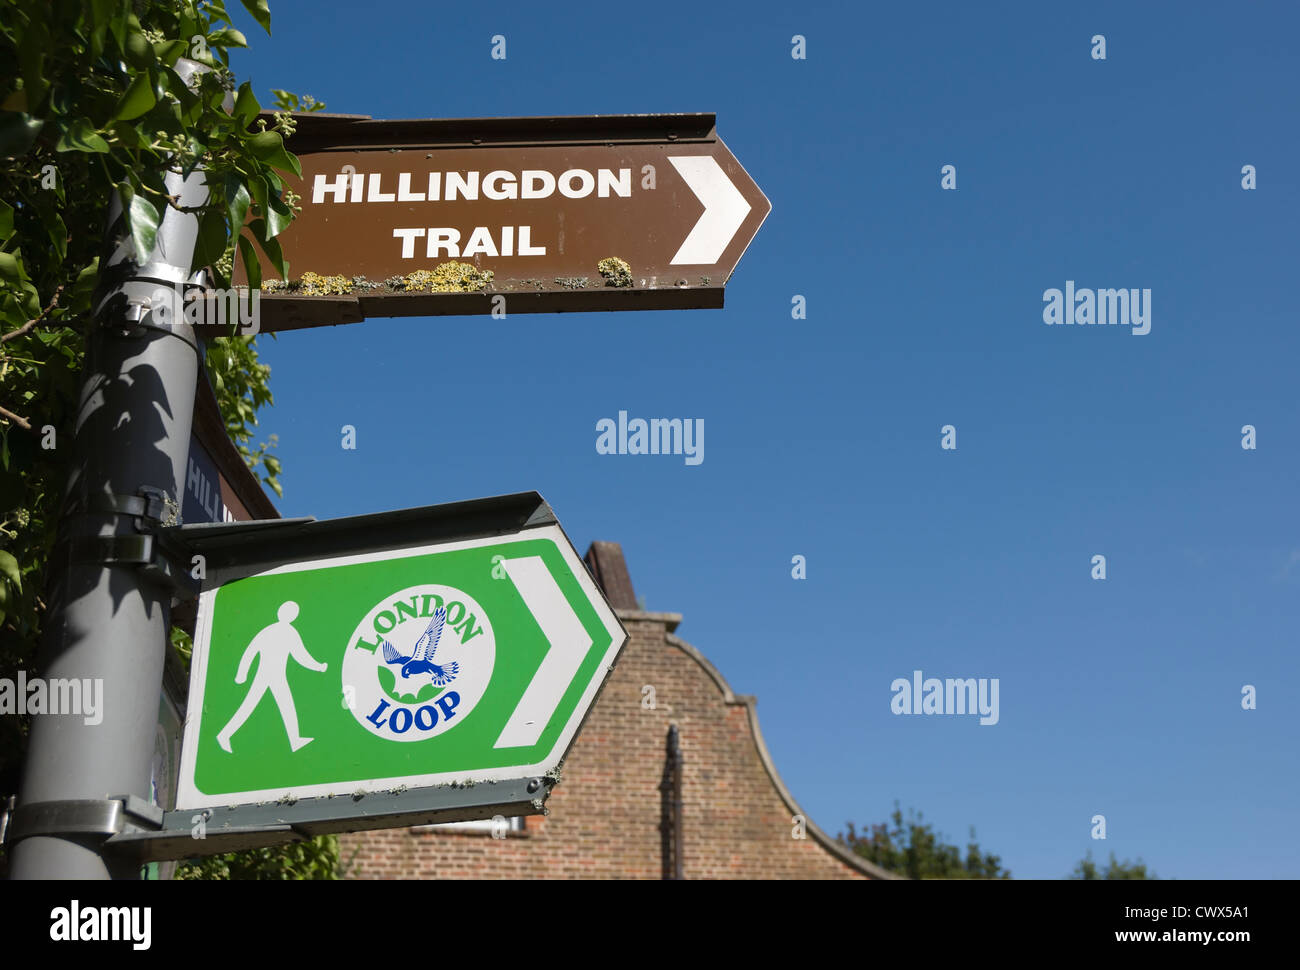 signs for hillingdon trail and london loop, hayes, middlesex, england Stock Photo